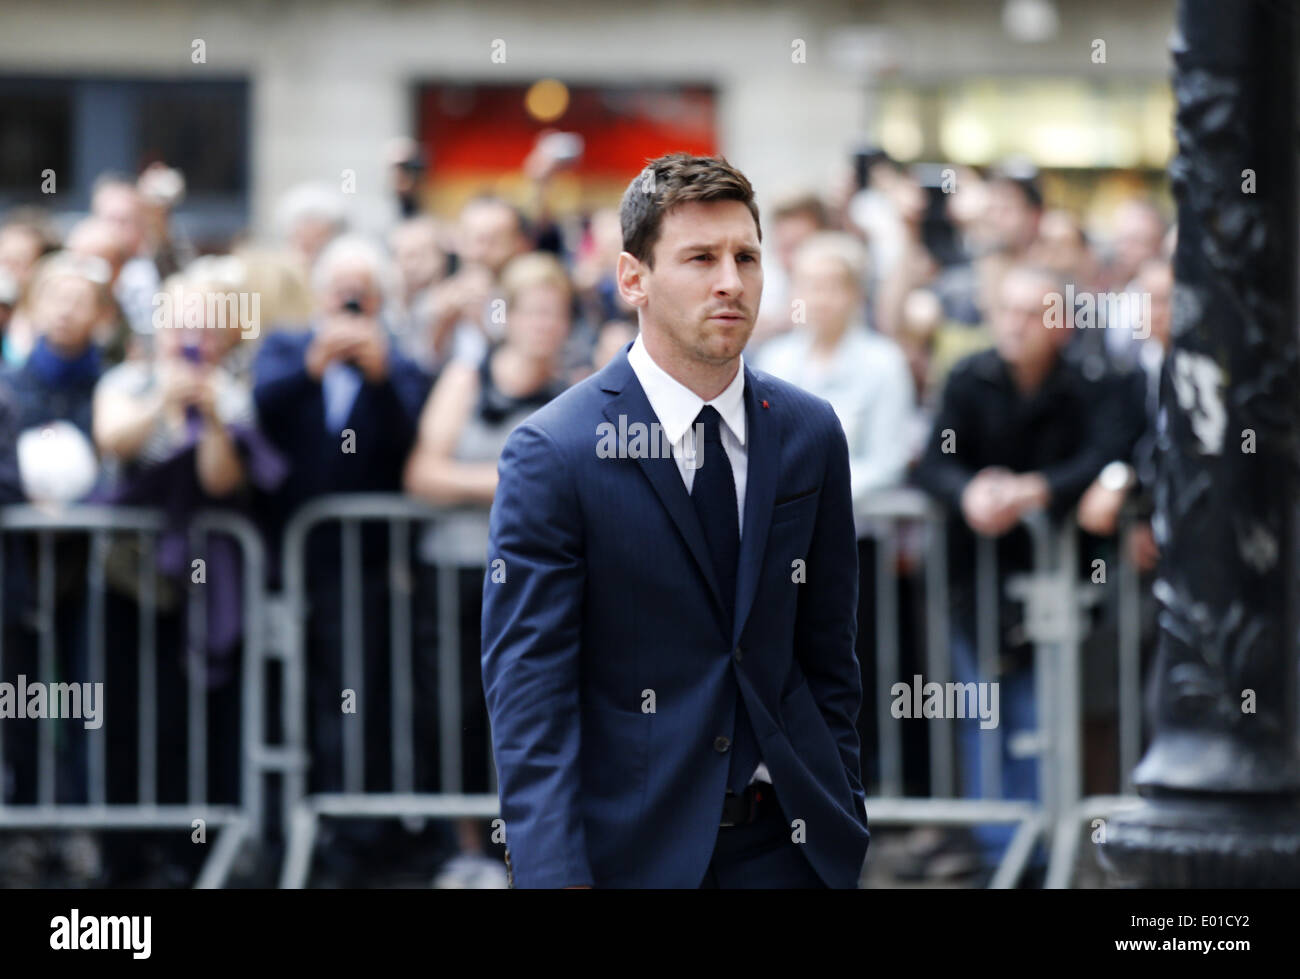 Barcelona, Spain. 28th Apr, 2014. Leo Messi entering in the cathedral of Barcelona to attend the funeral of Tito Vilanova. Photo: Joan Valls/Urbanandsport/Nurphoto. Credit:  Joan Valls/NurPhoto/ZUMAPRESS.com/Alamy Live News Stock Photo